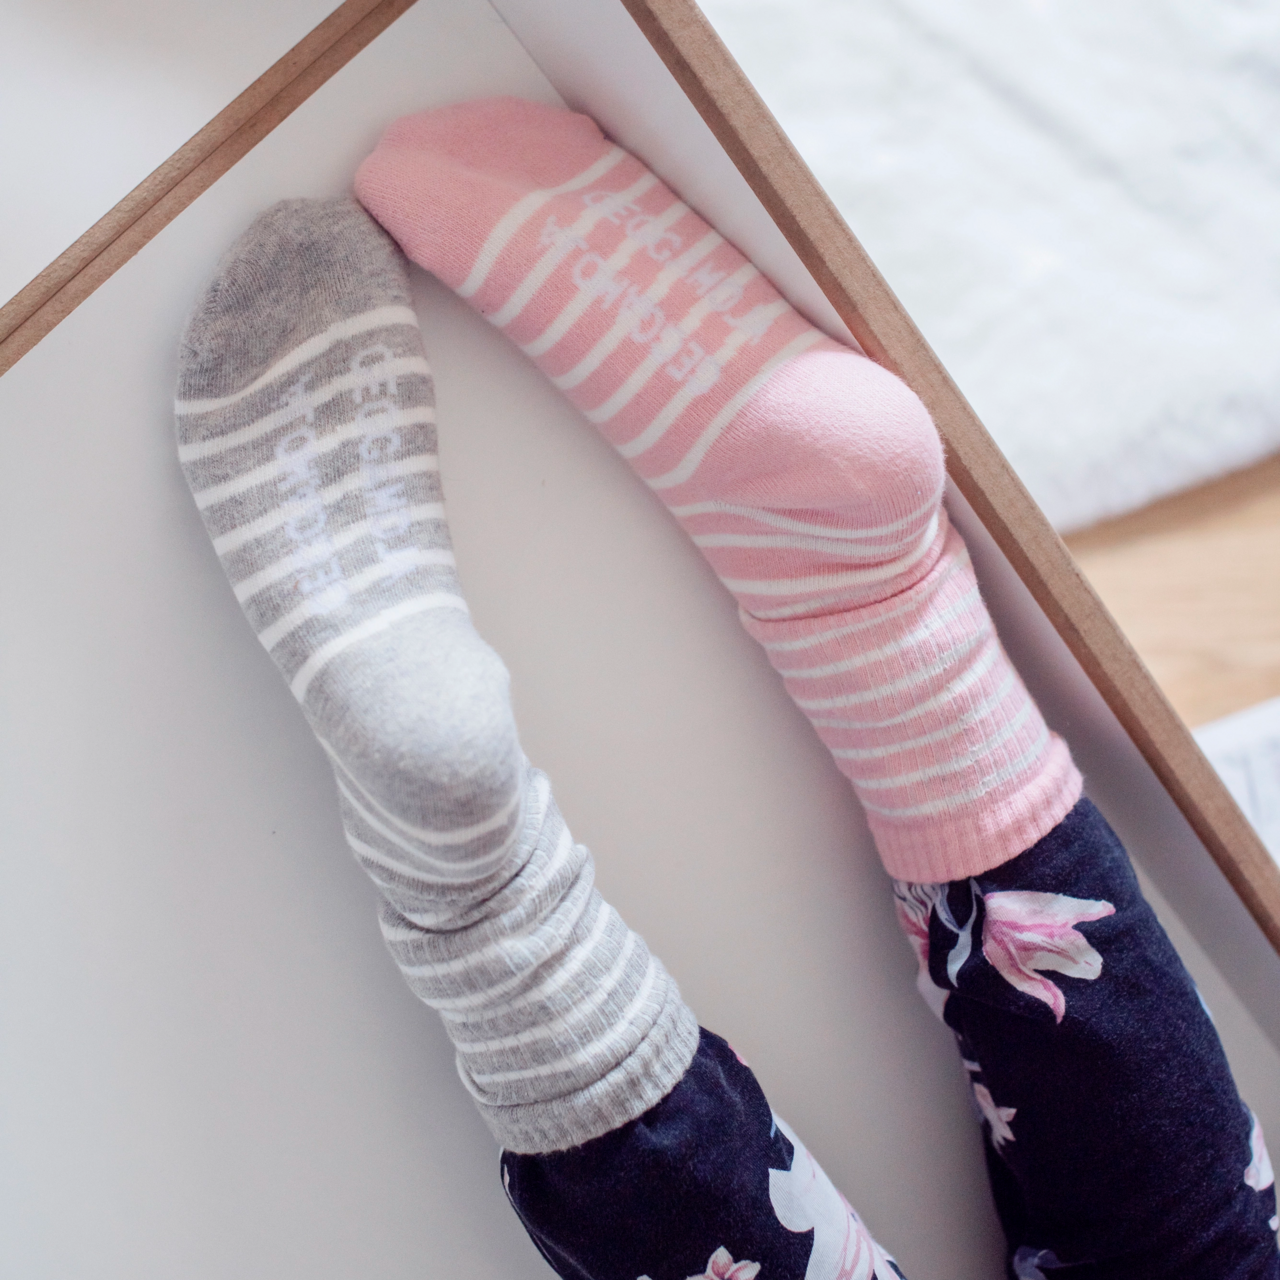 Sock Classic 2-pack Pink/white  25-27